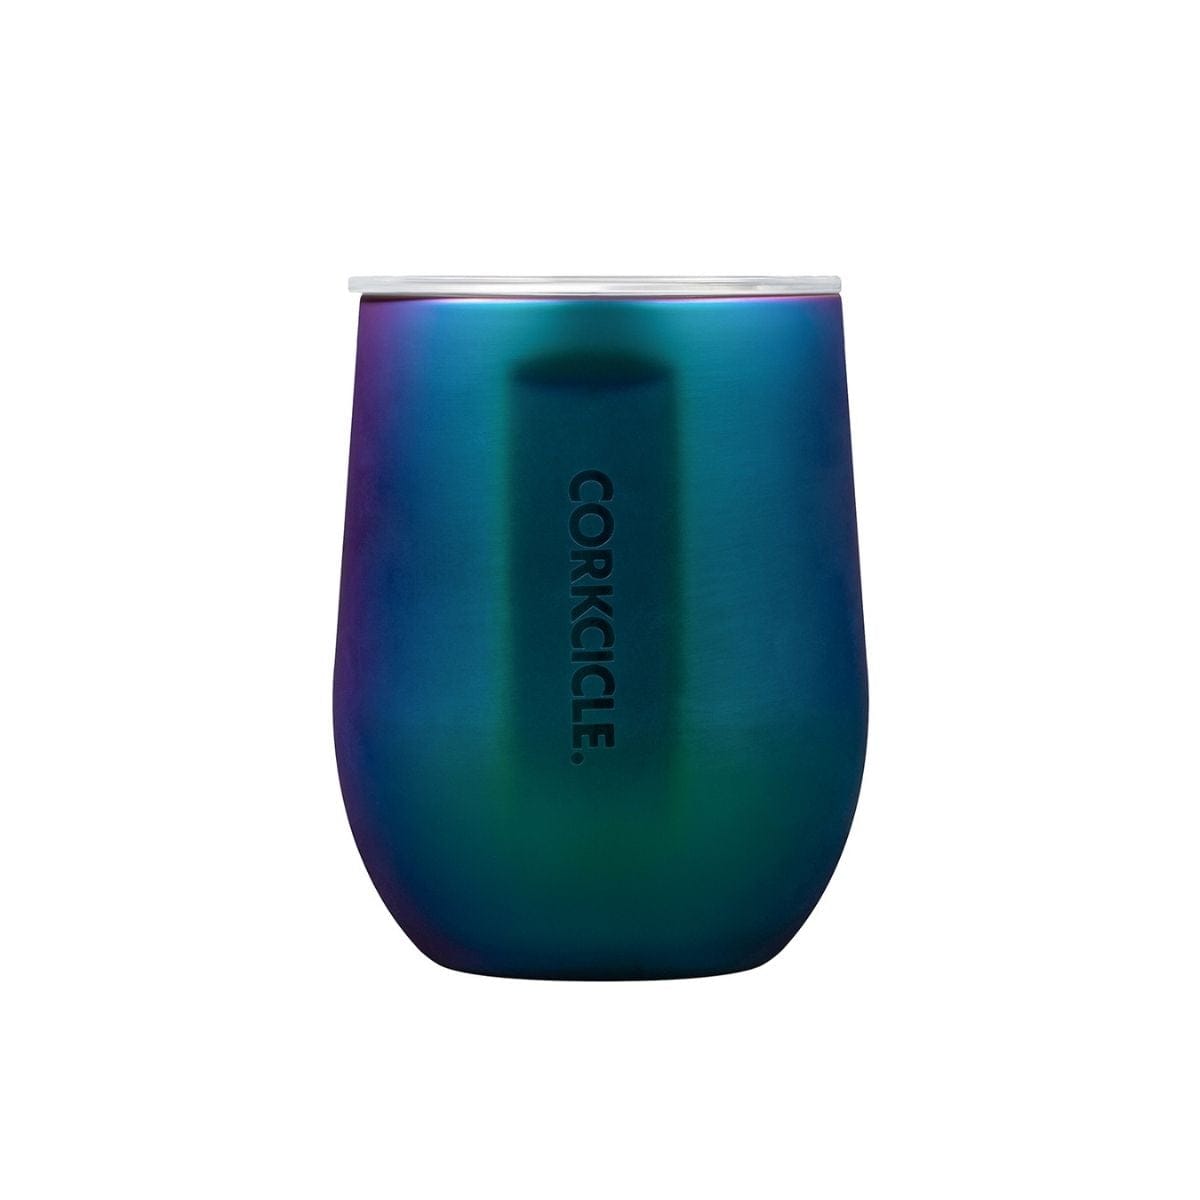 Corkcicle Dragonfly Stemless Triple Insulated Stainless Steel Cup 355ml Corkcicle Dragonfly Stemless Triple Insulated Stainless Steel Cup 355ml 